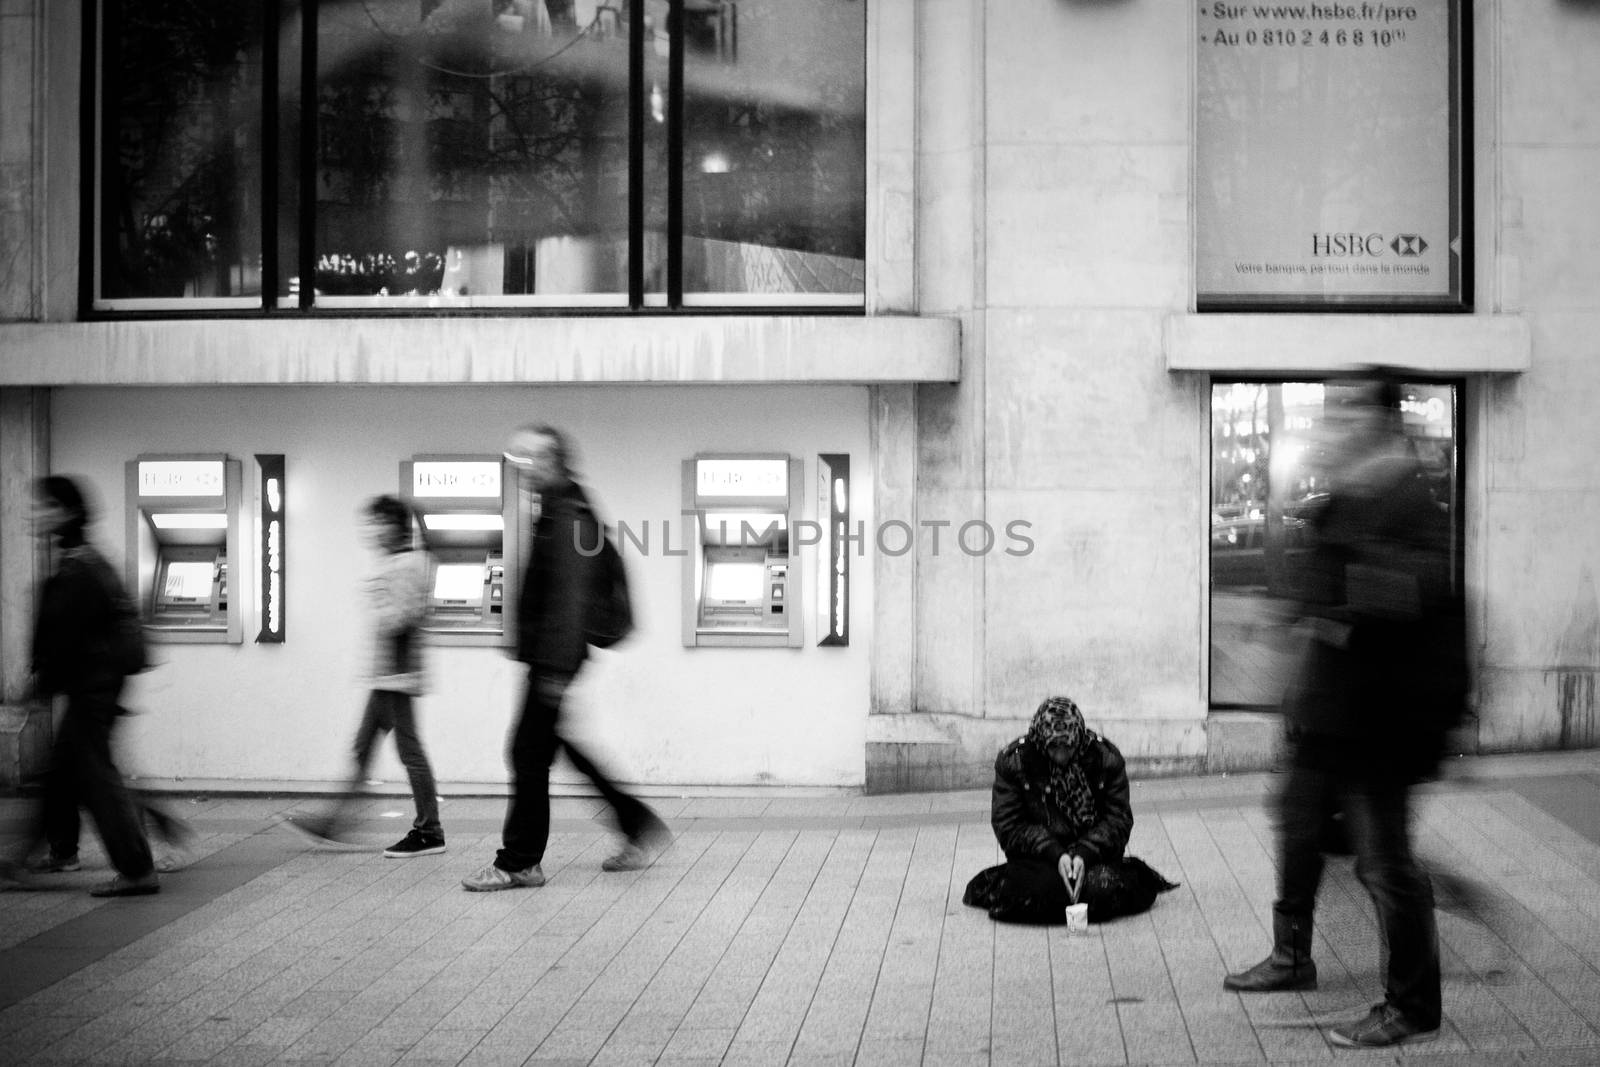 A homeless person begging on the street while people walk by